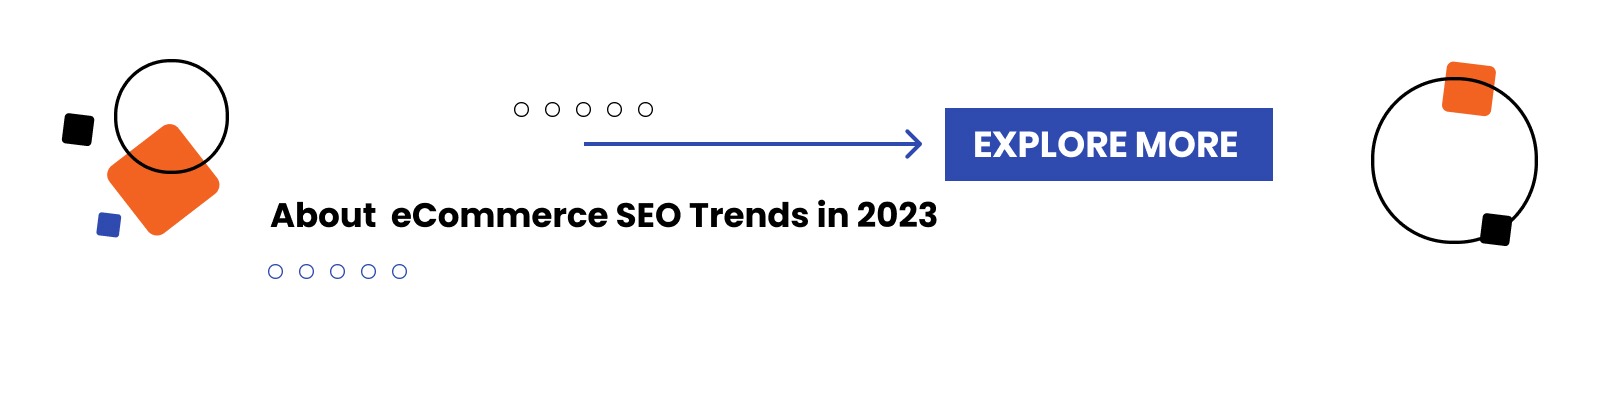 eCommerce SEO trends in 2023